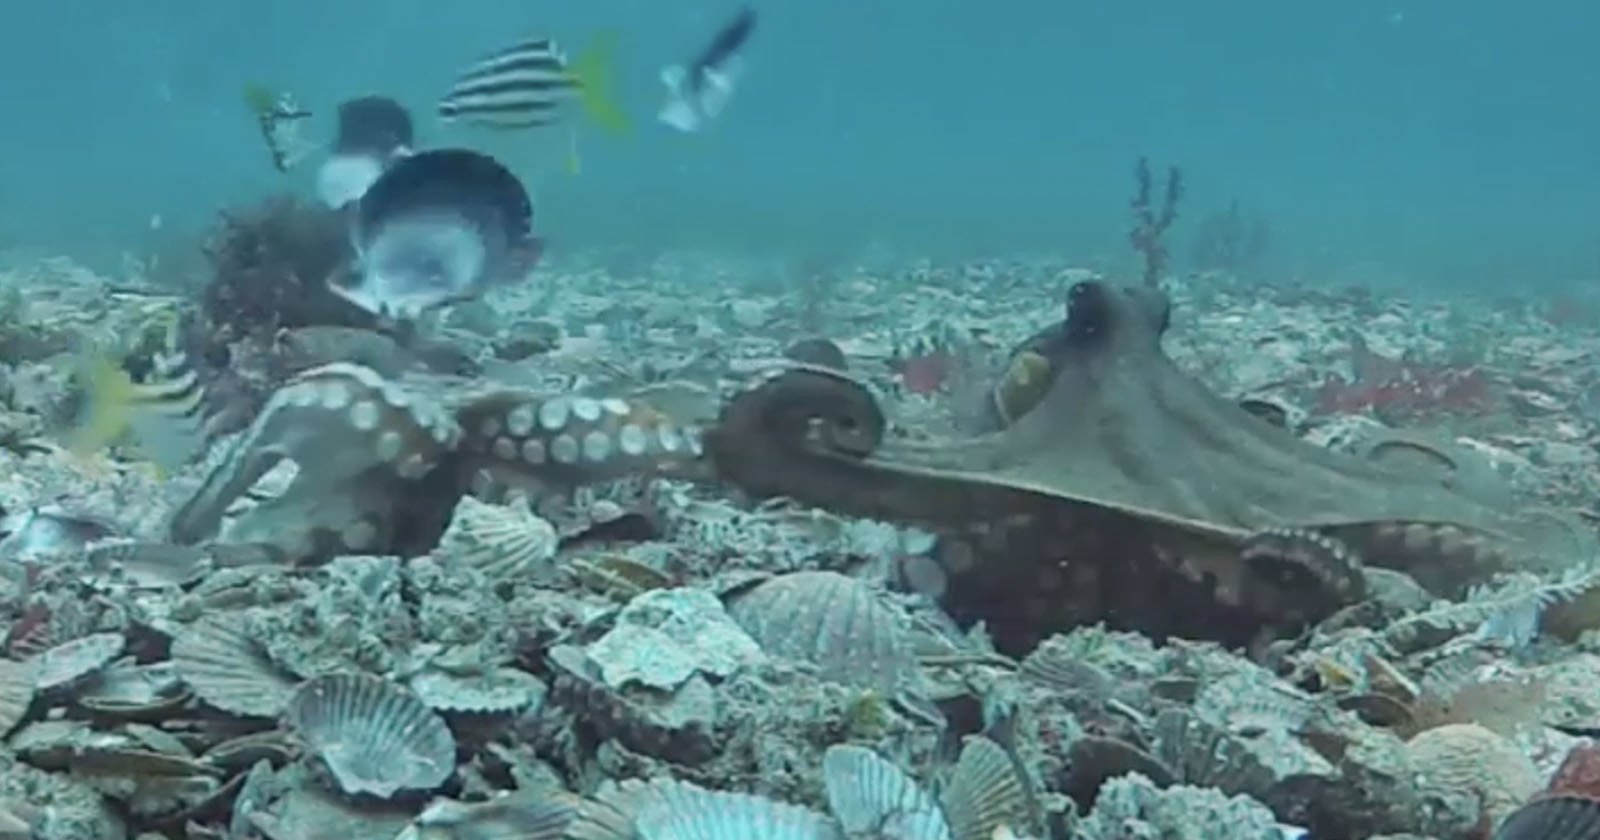 Underwater Cameras Capture Octopuses Hurling Shells at Each Other